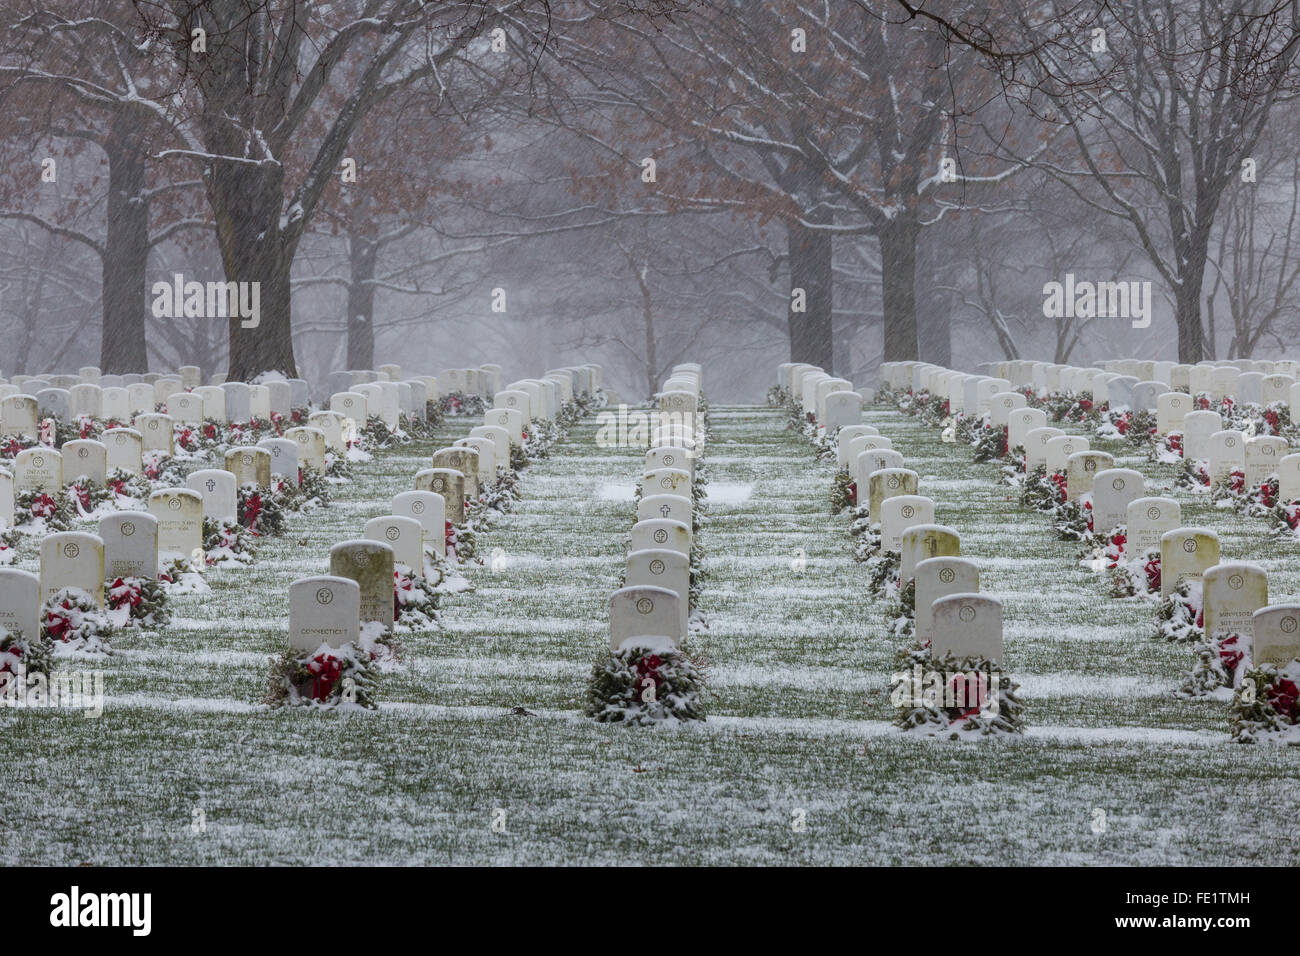 Snow begins to cover the headstones and wreaths from Wreaths Across America at Arlington National Cemetery Stock Photo